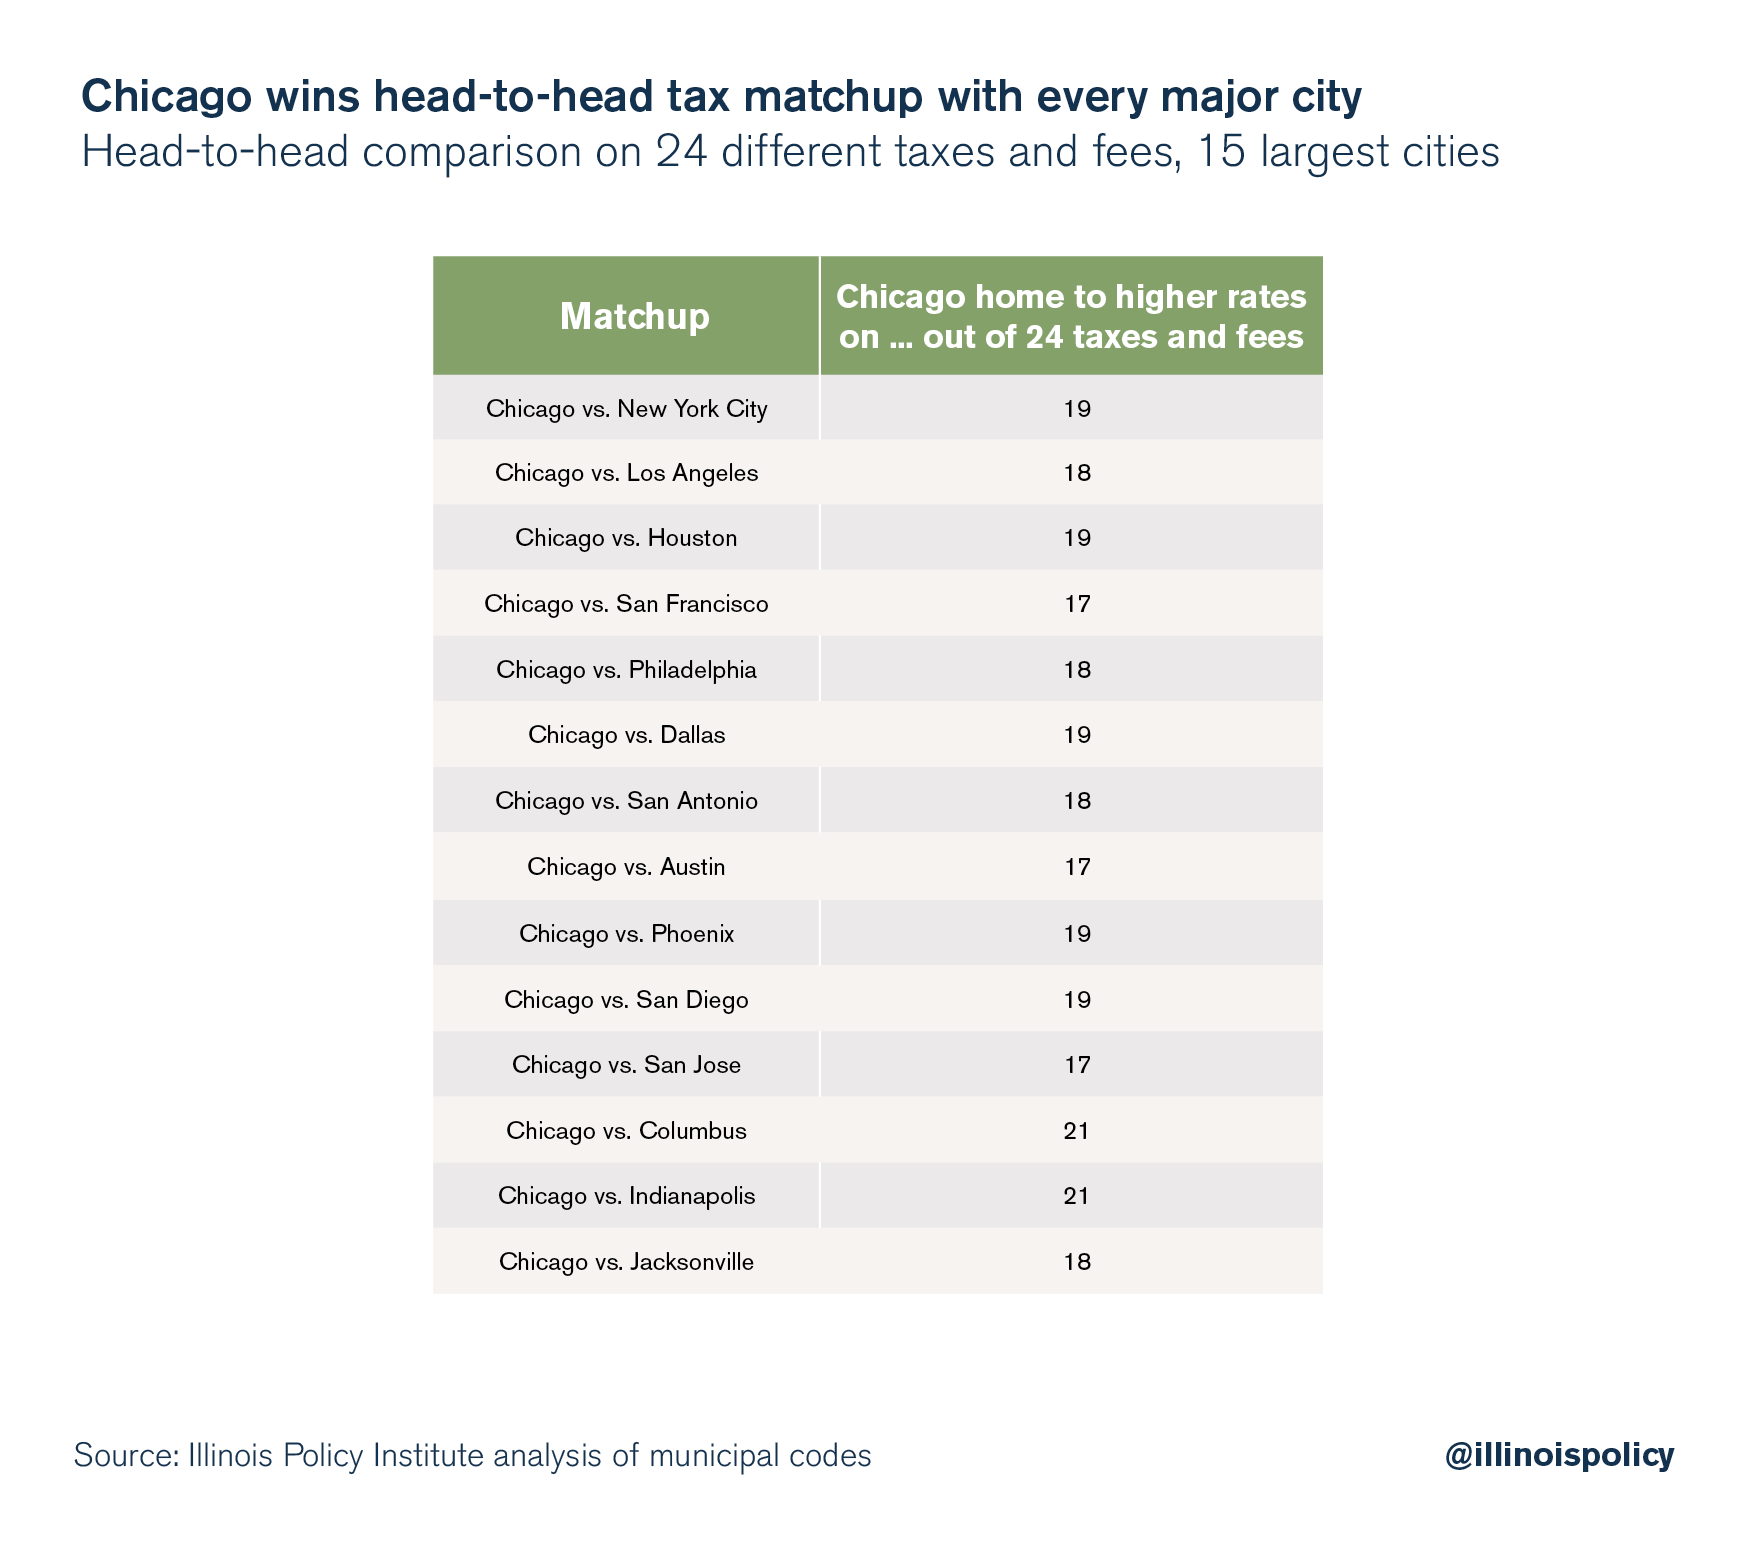 Chicago wins head-to-head matchup with every major city